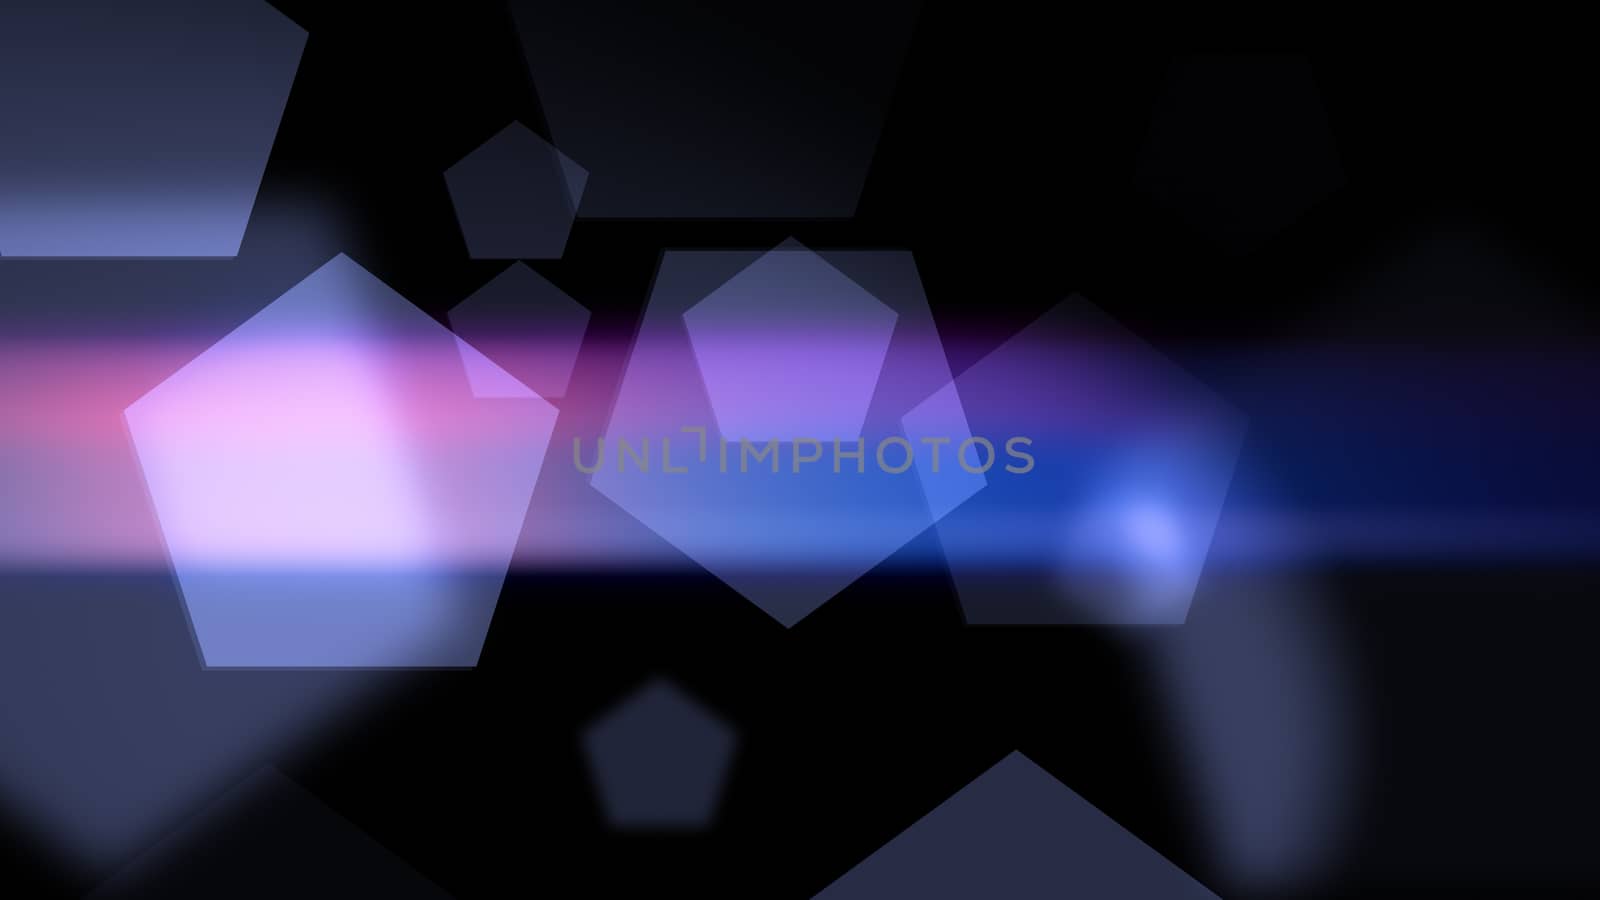 3D illustration of Abstract geometric background with pentagons. Future Digital technology background. Rastr design for science, technology, medicine or holiday.